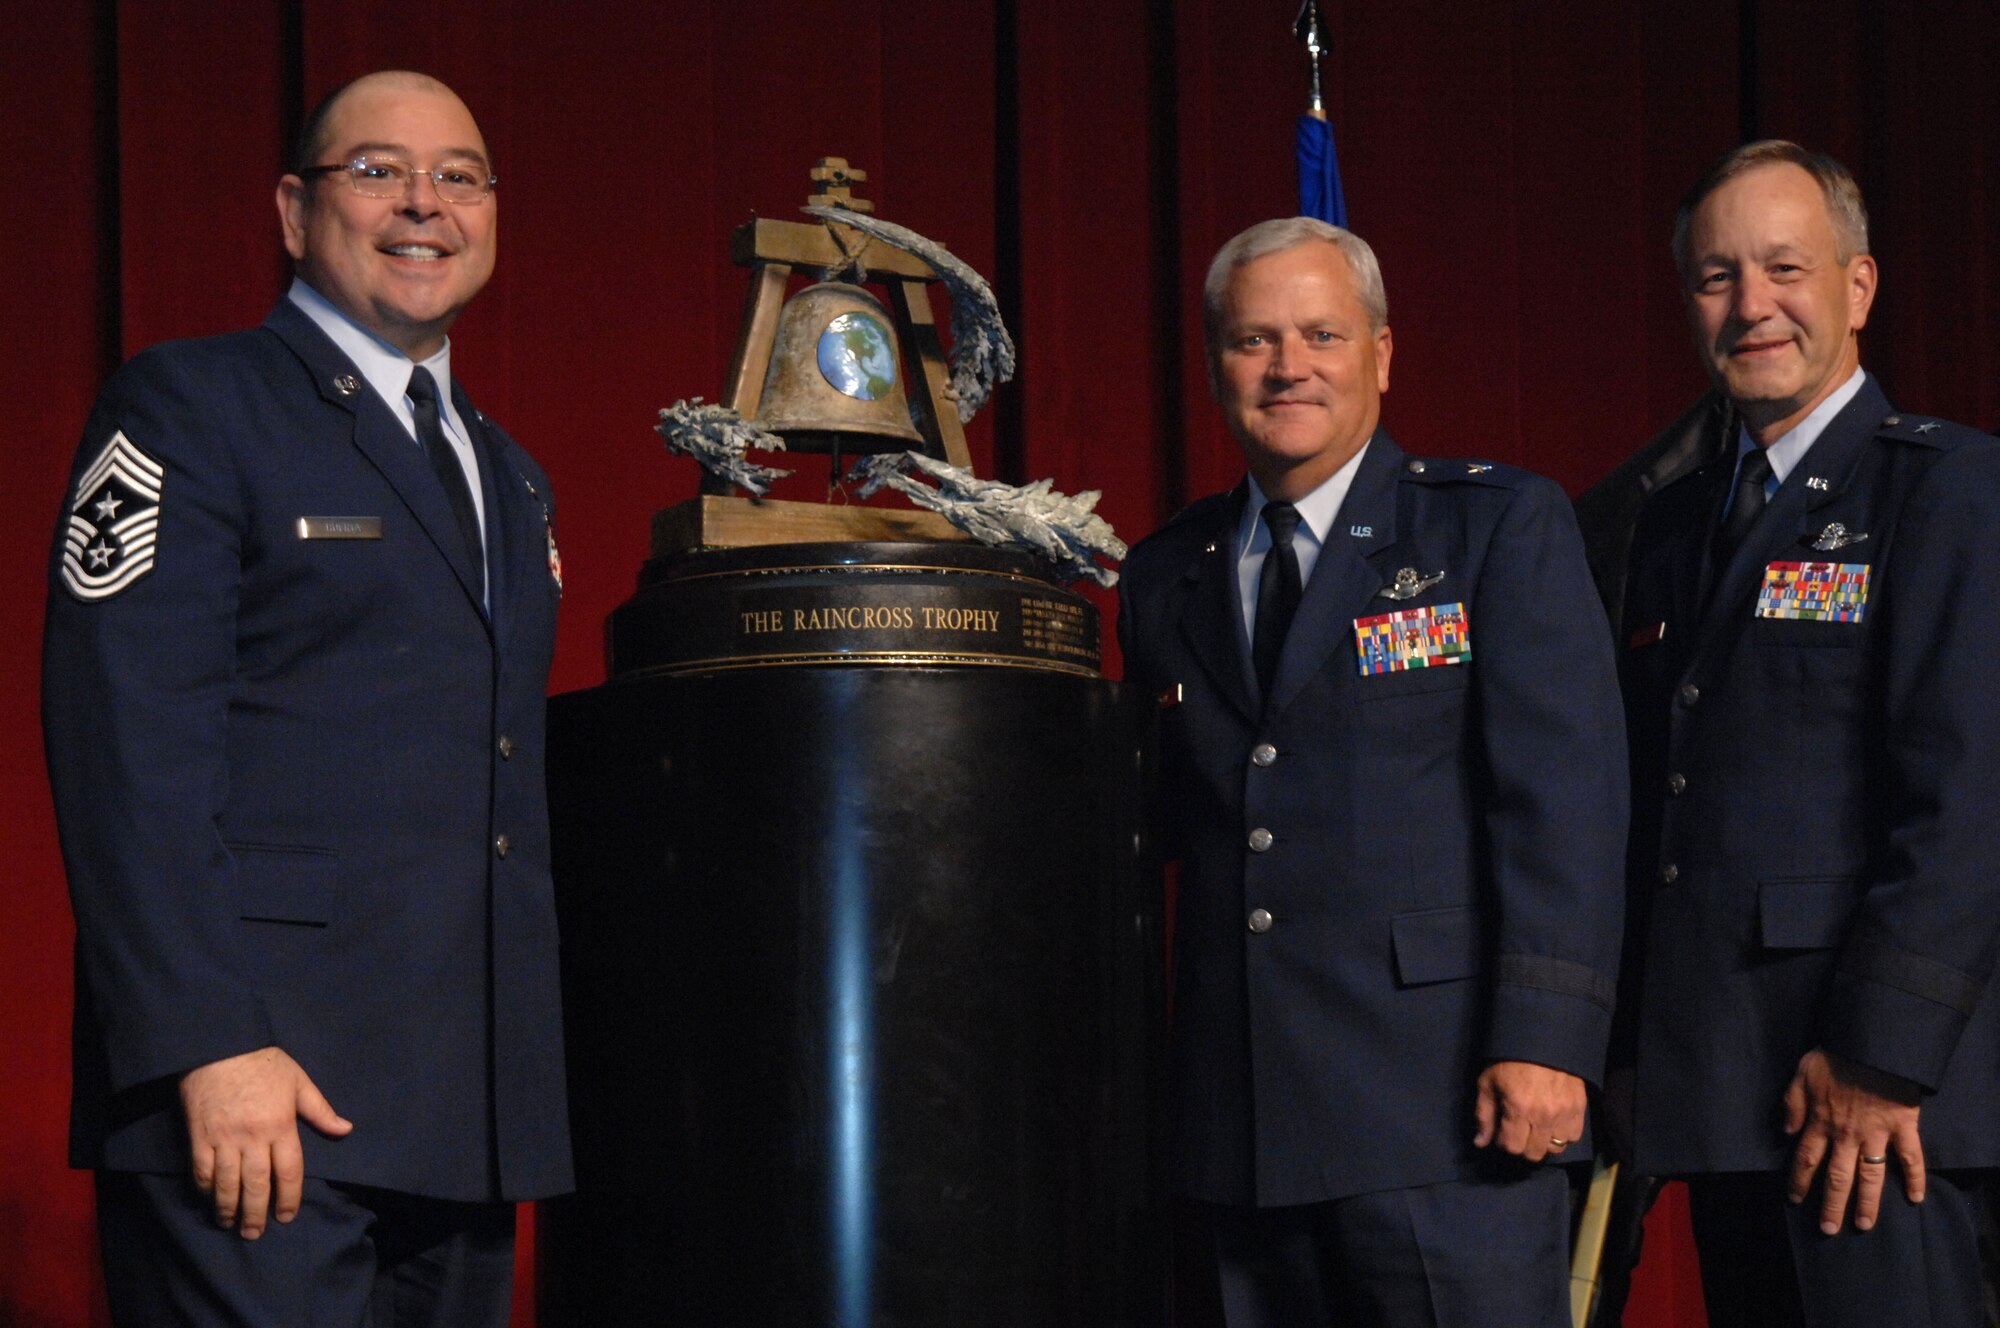 Chief Master Sgt. Agustin Huerta, 452nd Air Mobility Wing Command Chief, March Air Reserve Base, Calif.  left, Brig. Gen. James Melin, center, 452nd AMW Commander, and Brig. Gen. Eric W. Crabtree, right, Commander, Fourth Air Force, pose with the Raincross Trophy after it was awarded to the 452nd AMW during the 11th Annual Raincross Trophy Dinner held July 23, 2009, at the Riverside Convention Center, Riverside, Calif. The dinner is hosted by the Greater Riverside Chambers of Commerce Military Affairs Committee to honor and recognize the 11 wings and two groups in 4th Air Force.  (U. S. Air Force photo/Senior Master Sgt. Kim Allain)  (released)